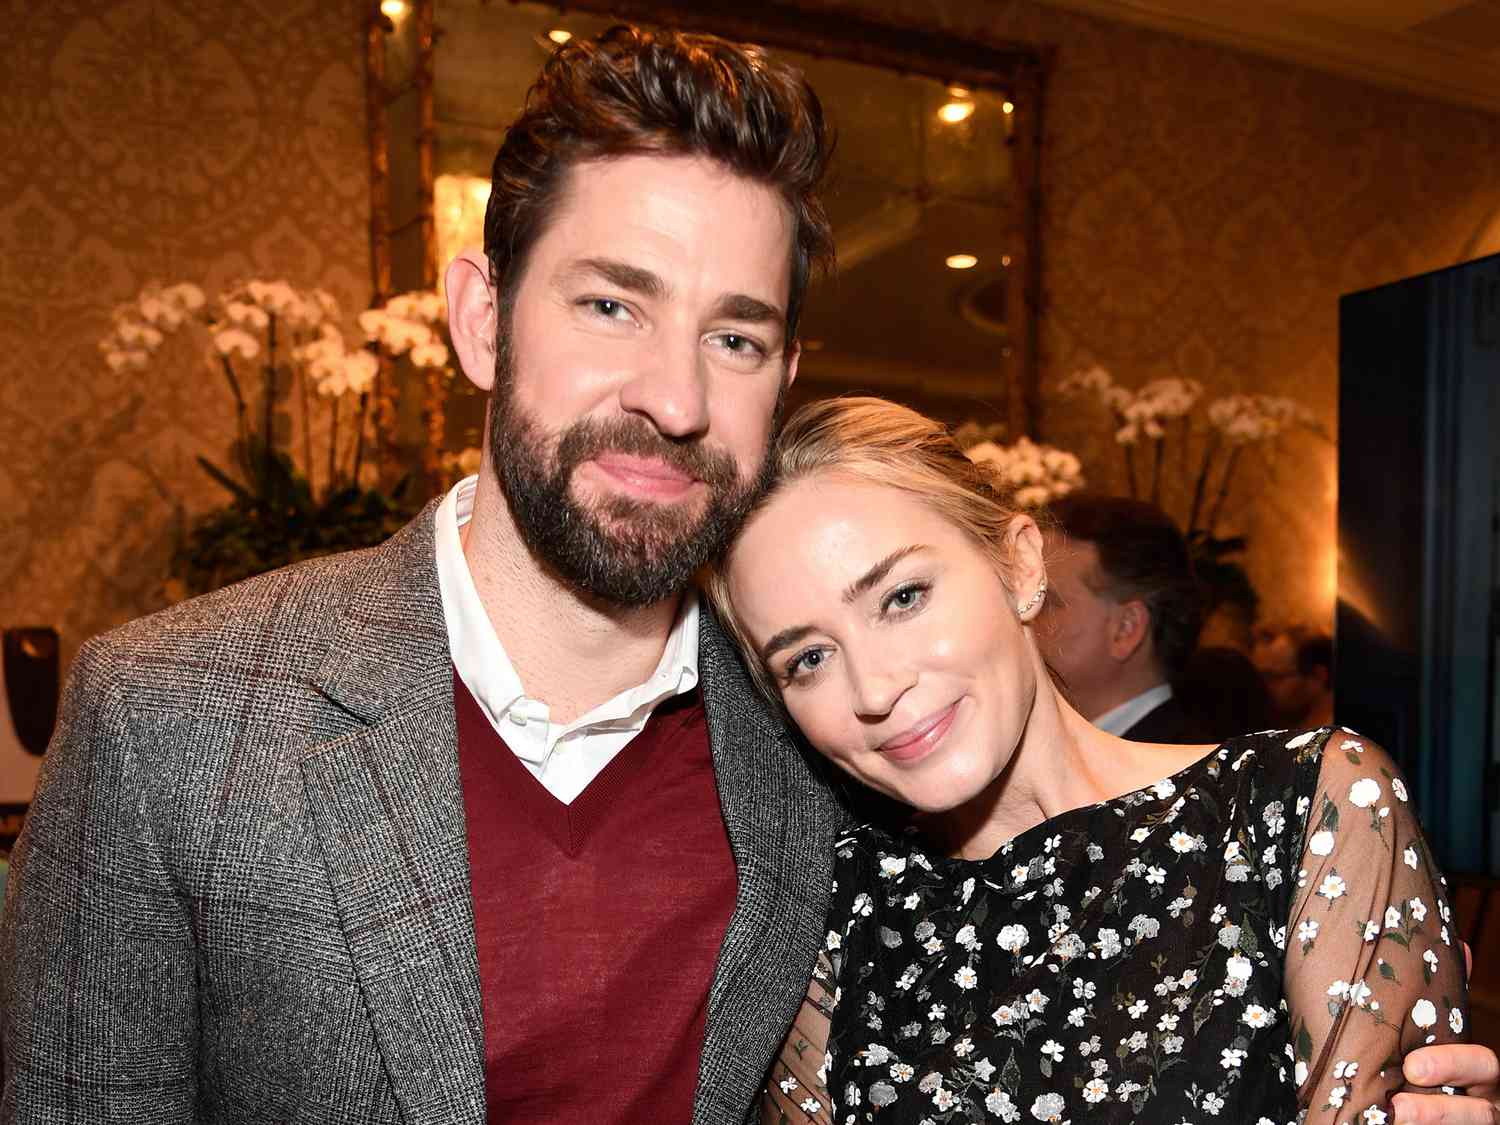 John Krasinski Says He 'Wouldn't Be Anywhere' Without Wife Emily Blunt